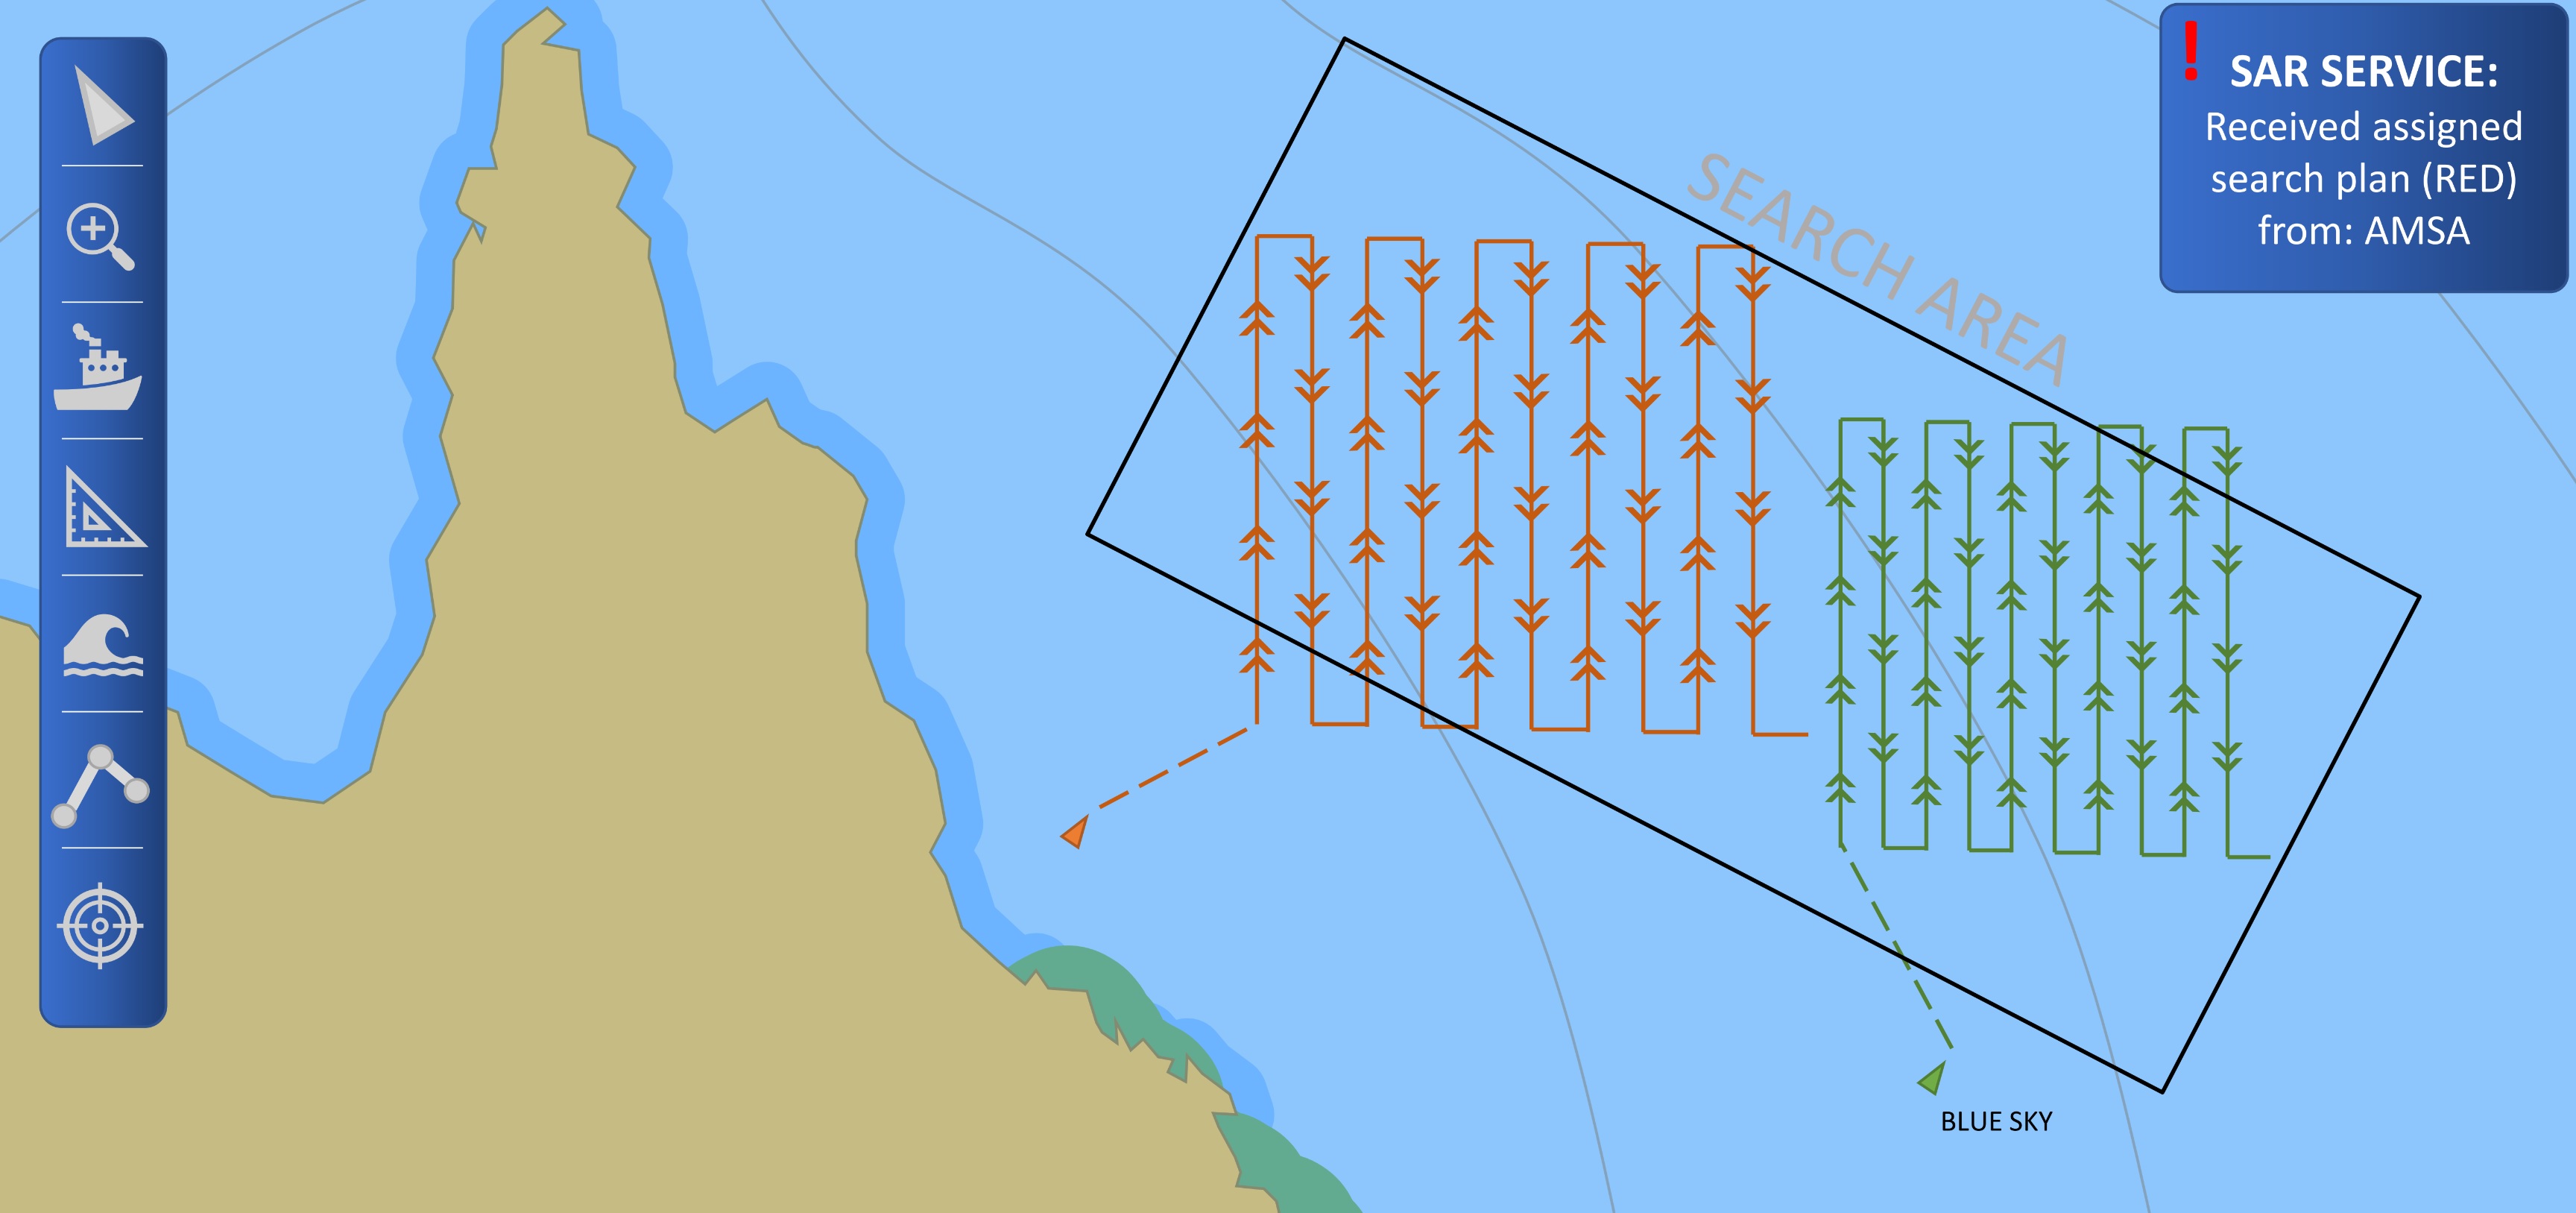 Map showing the far north east coast of Australia and example search plan area highlighted over the Pacific Ocean to the east. Further described in the accompanying text.